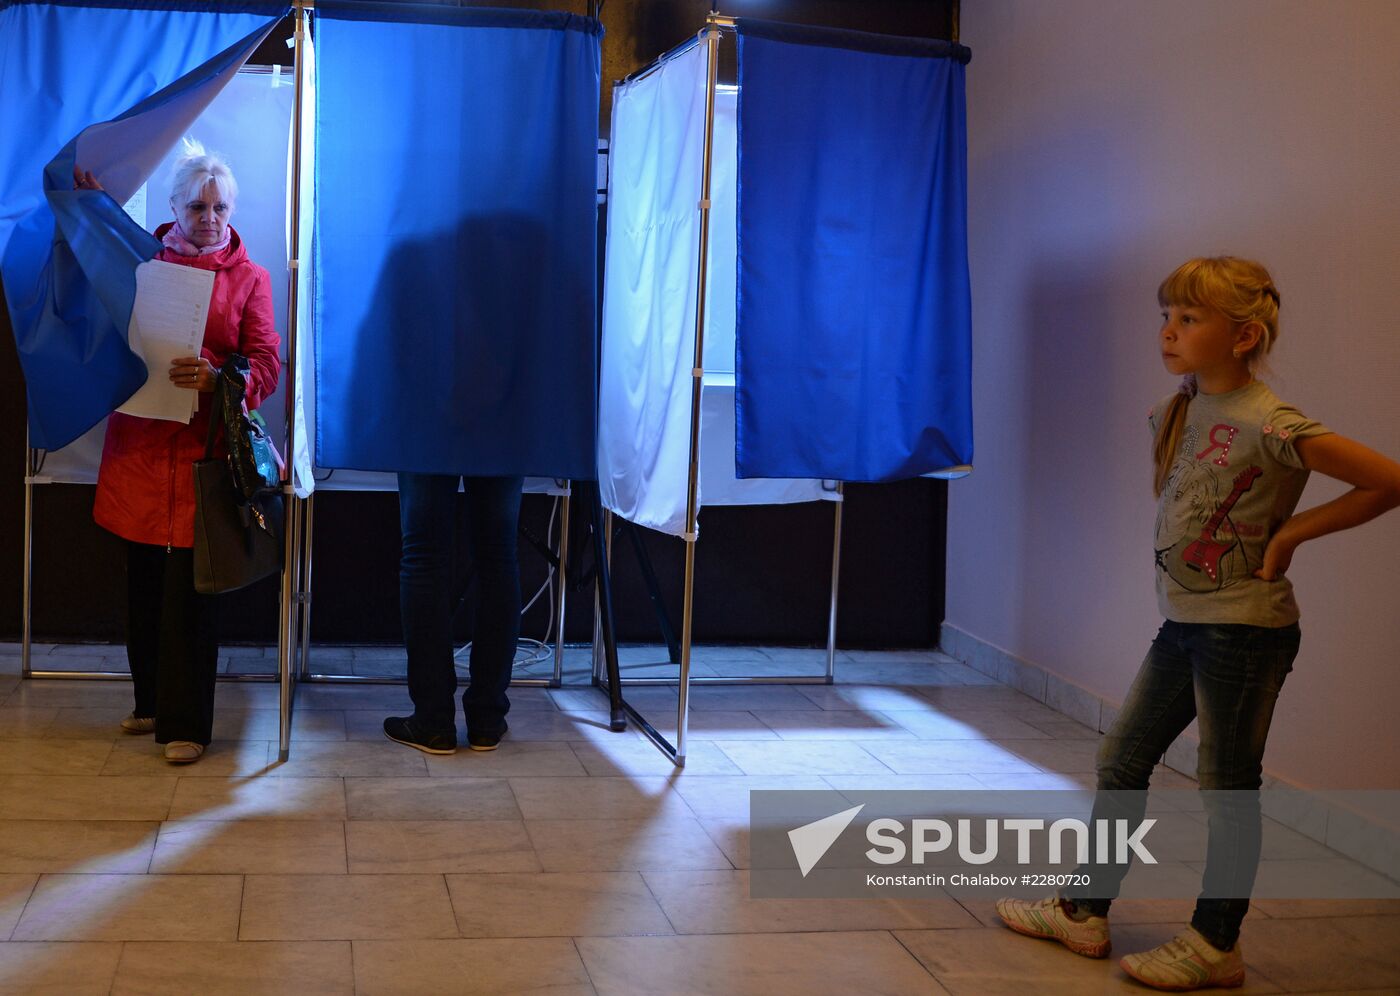 Russia holds Unified Voting Day